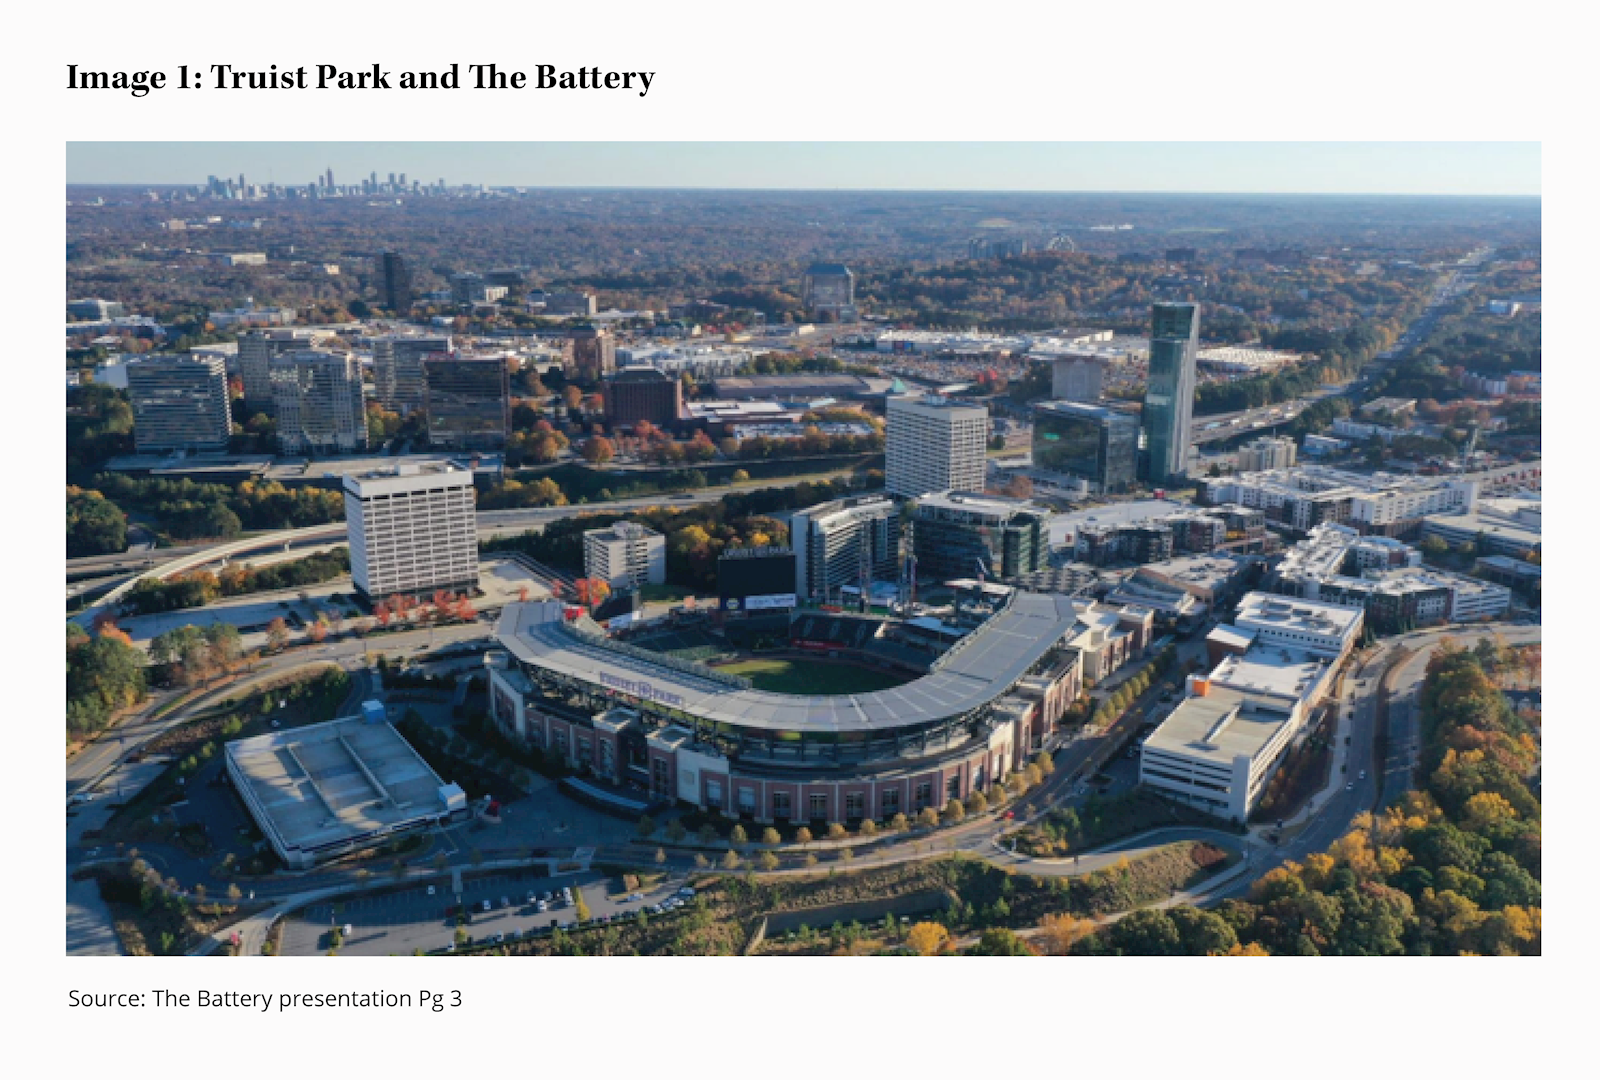 So Far, SunTrust Park And The Battery Bringing In Revenue As Expected